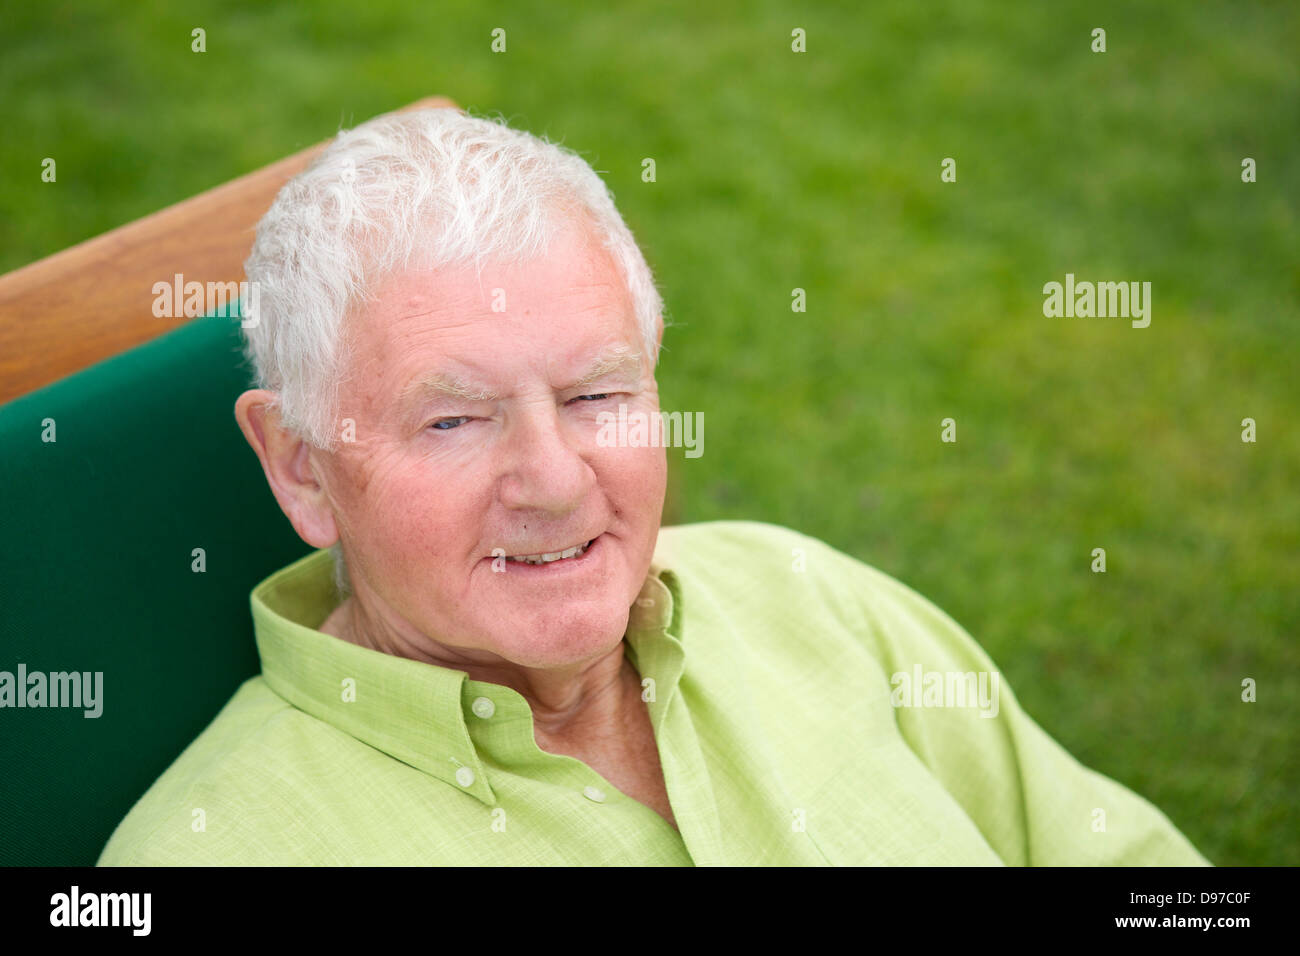 Seventies Man Active Retirement Lifestyle Reclining Smiling Stock Photo